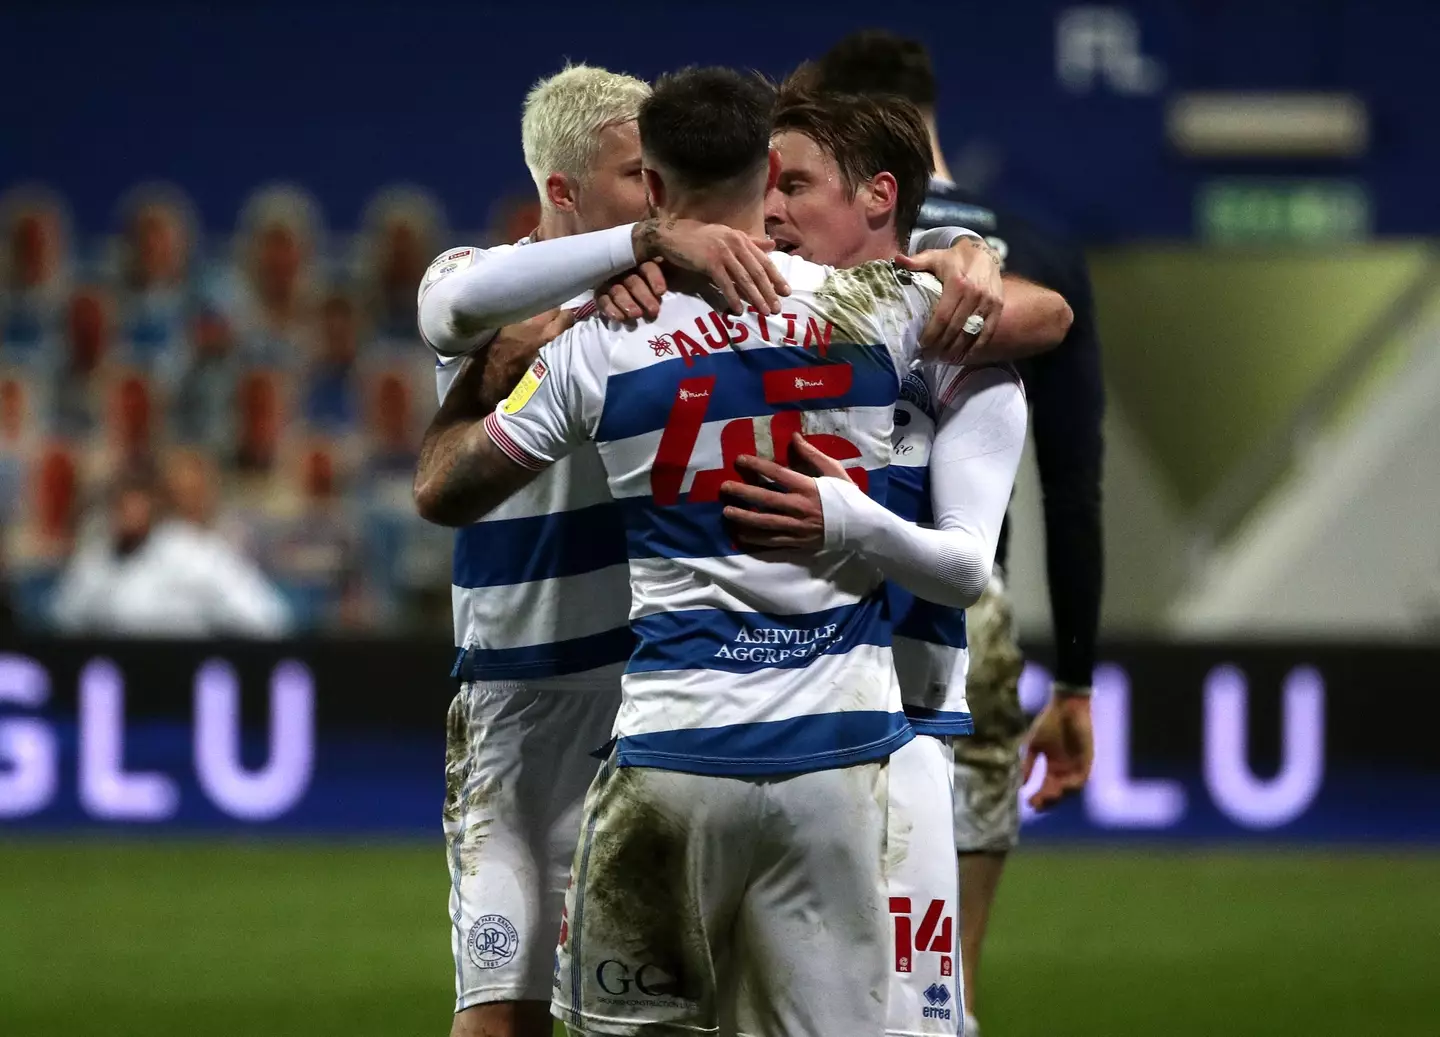 QPR are the most potent attacking force in the Championship so far this season